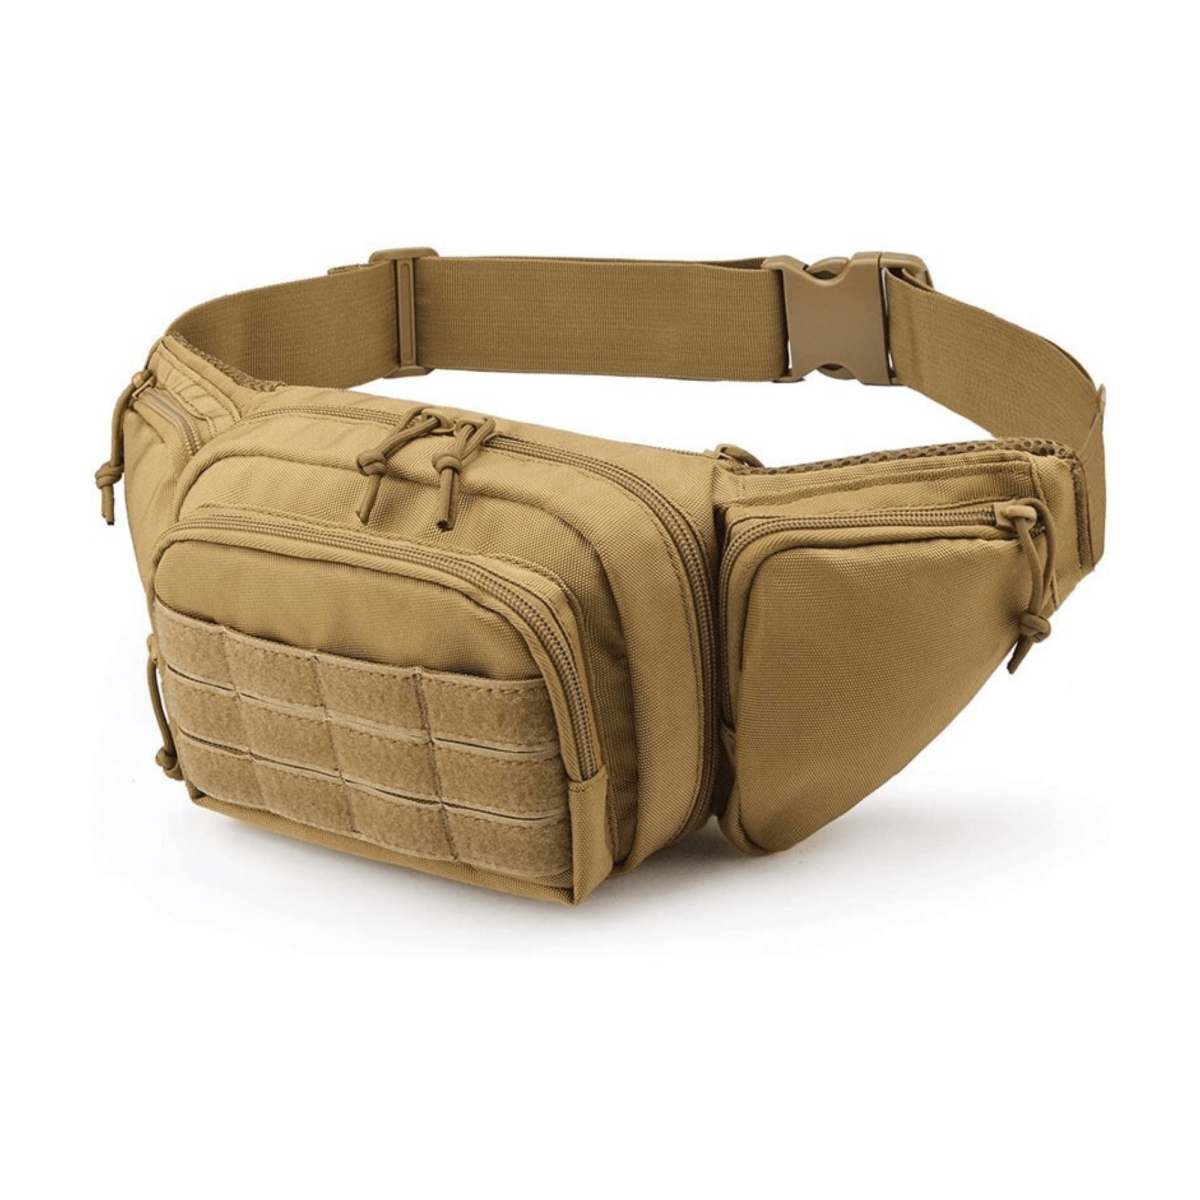 Picture of JupiterGear JG-TFANPCK-1-KHAKI Tactical Military Waist Bag & MOLLE EDC Pouch For Outdoor Activities